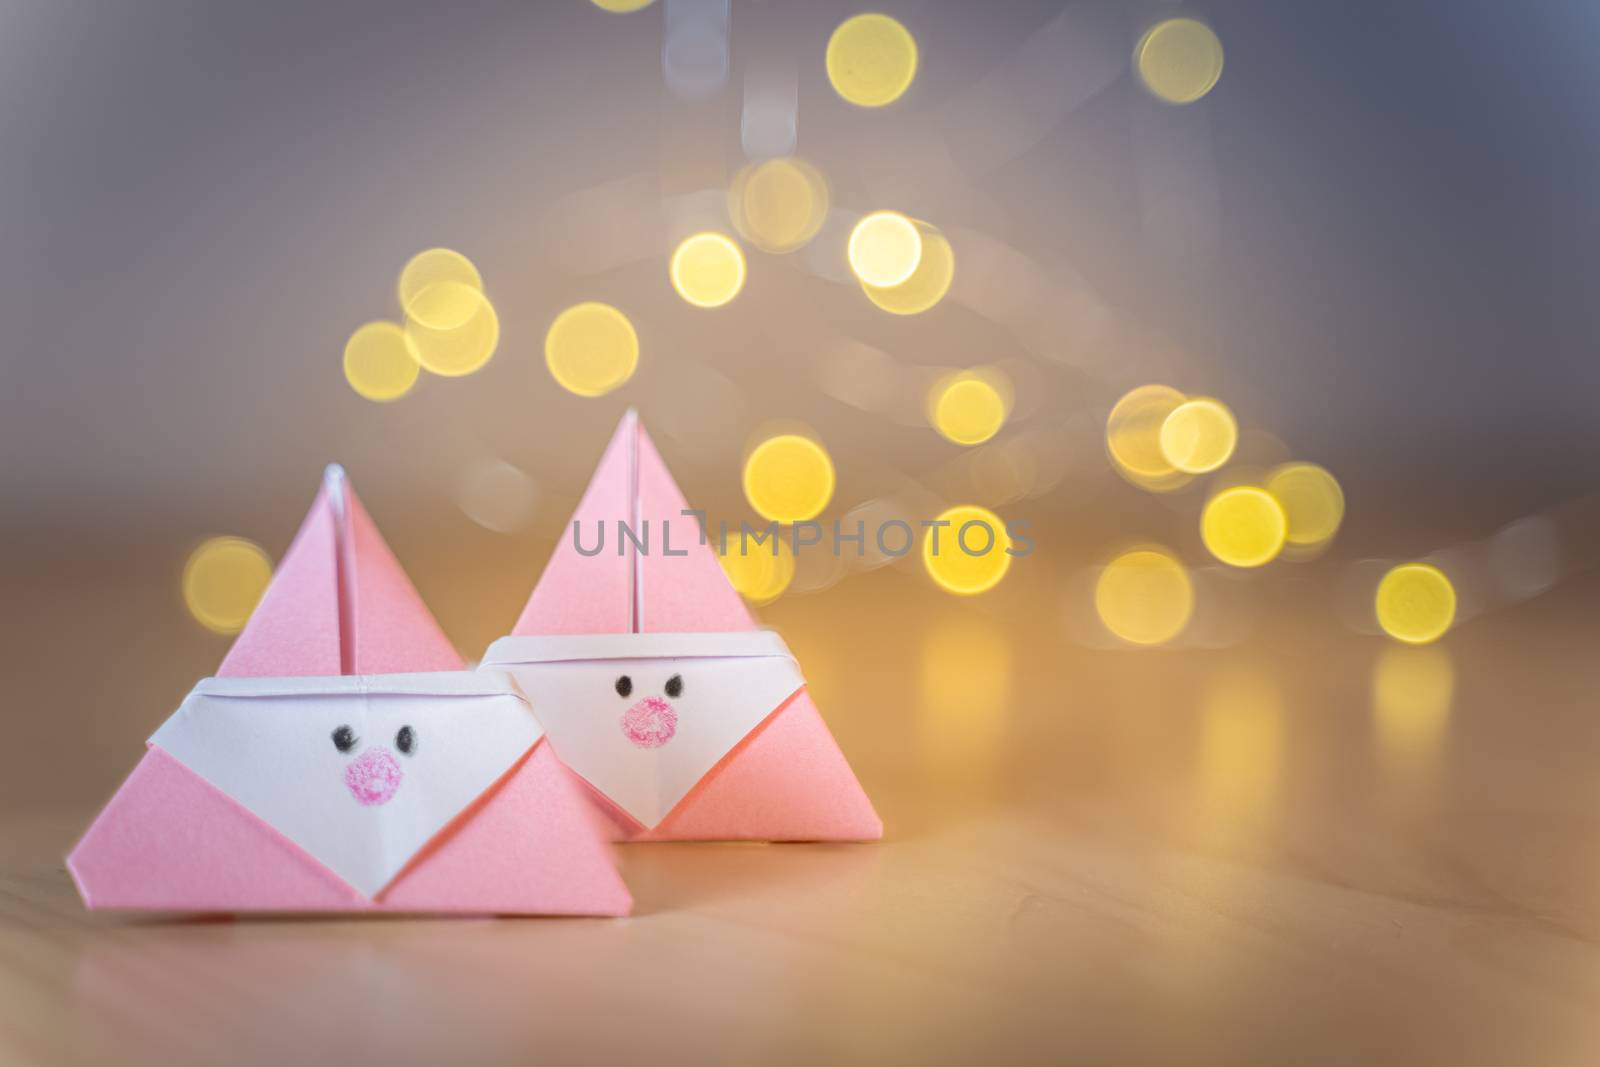 Origami Xmas scene with Santa claus and bokeh lights by tanaonte